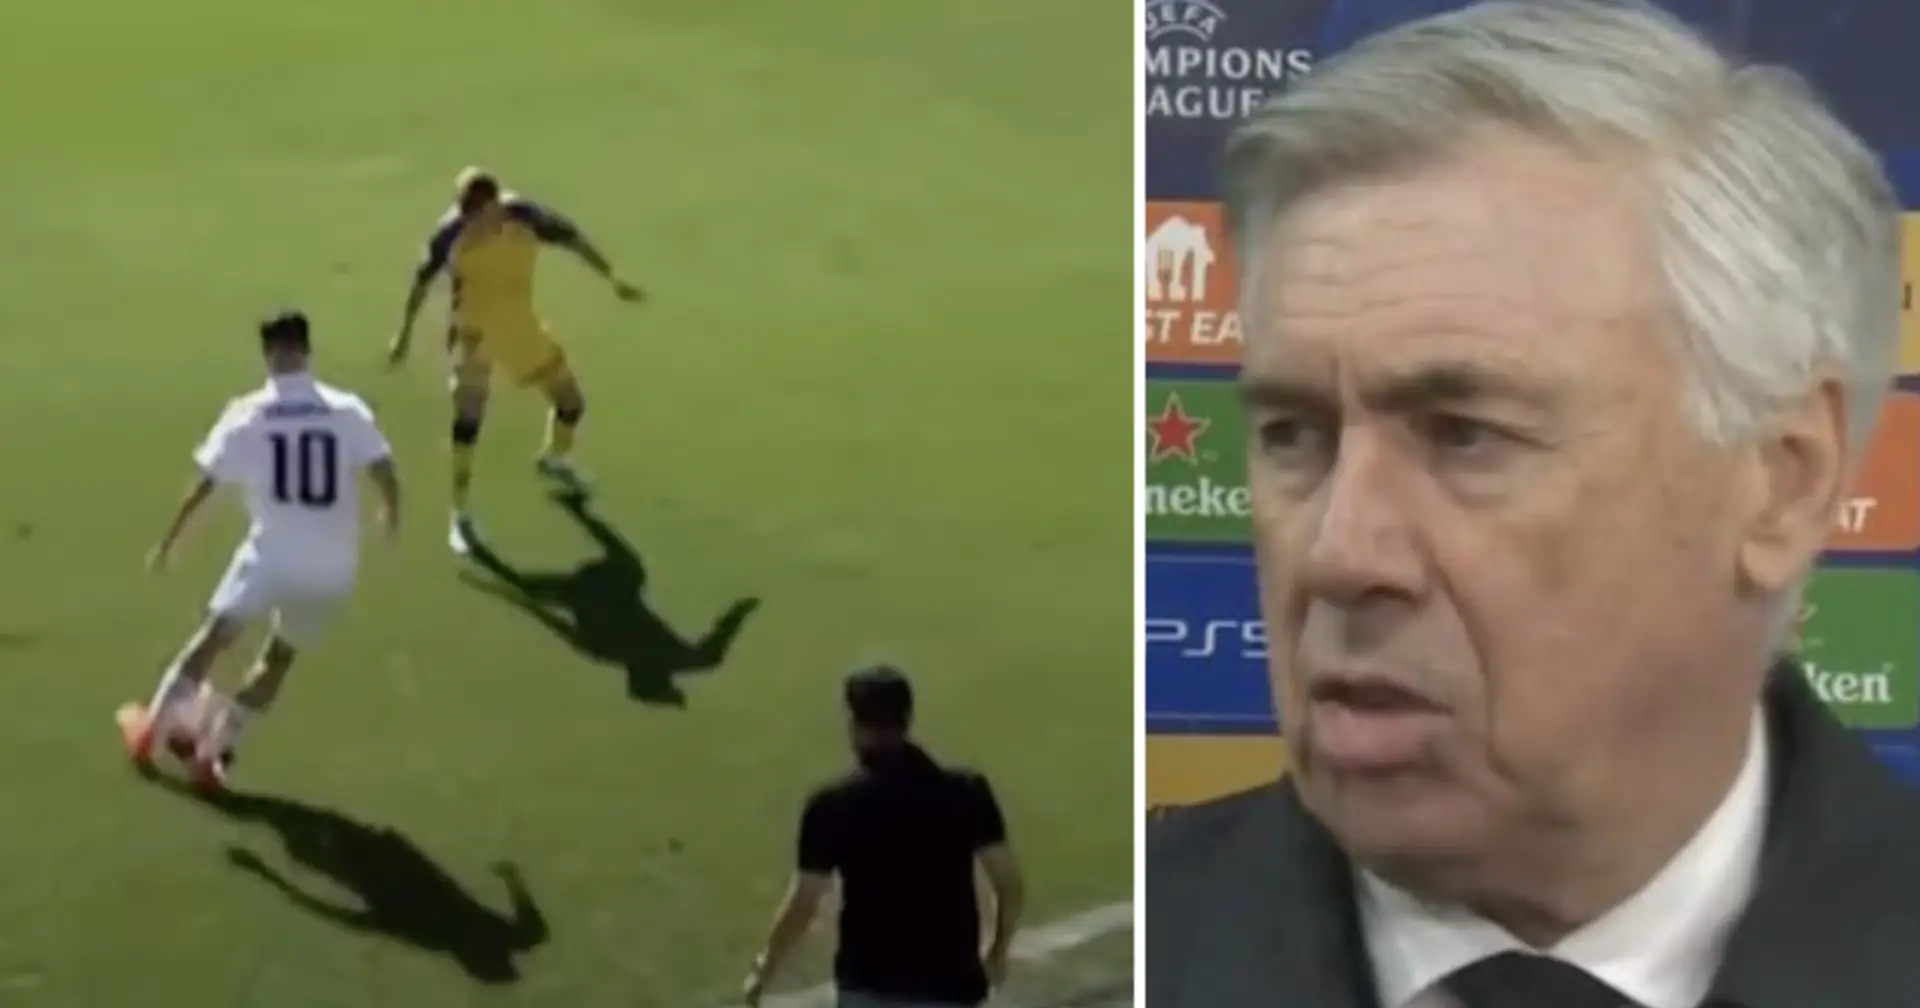 'Could have a prime Zidane regen in Castilla and would still neglect him': fans aim dig at Ancelotti for having no faith in young players